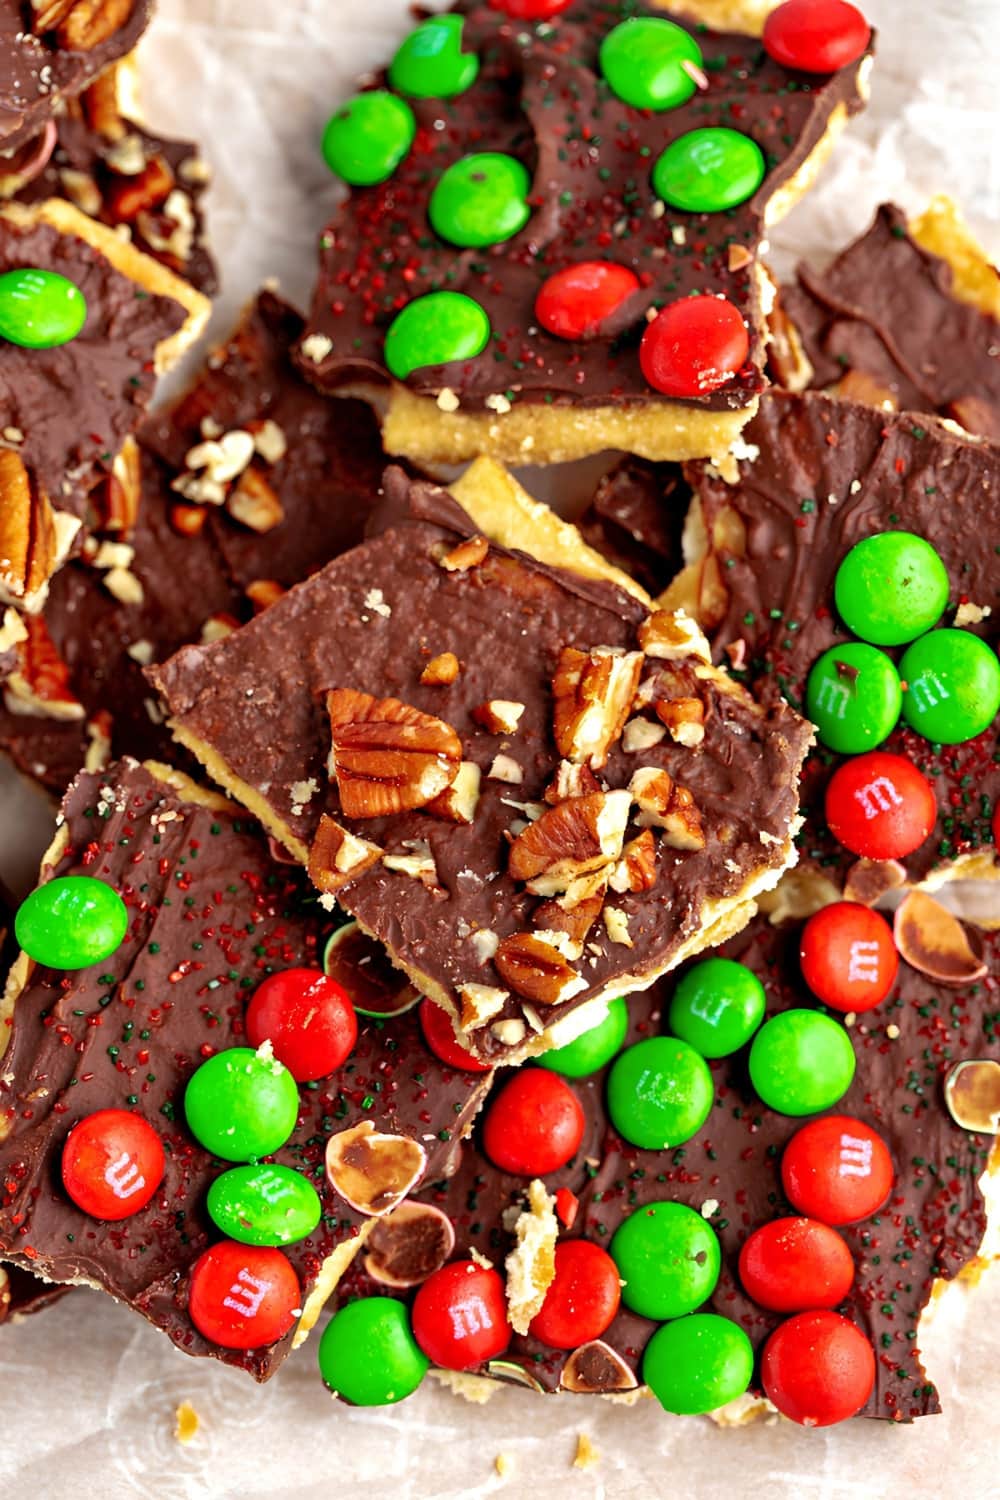 Saltines covered in toffee and chocolate sprinkled with crushed pecan nuts and M&Ms candies. 